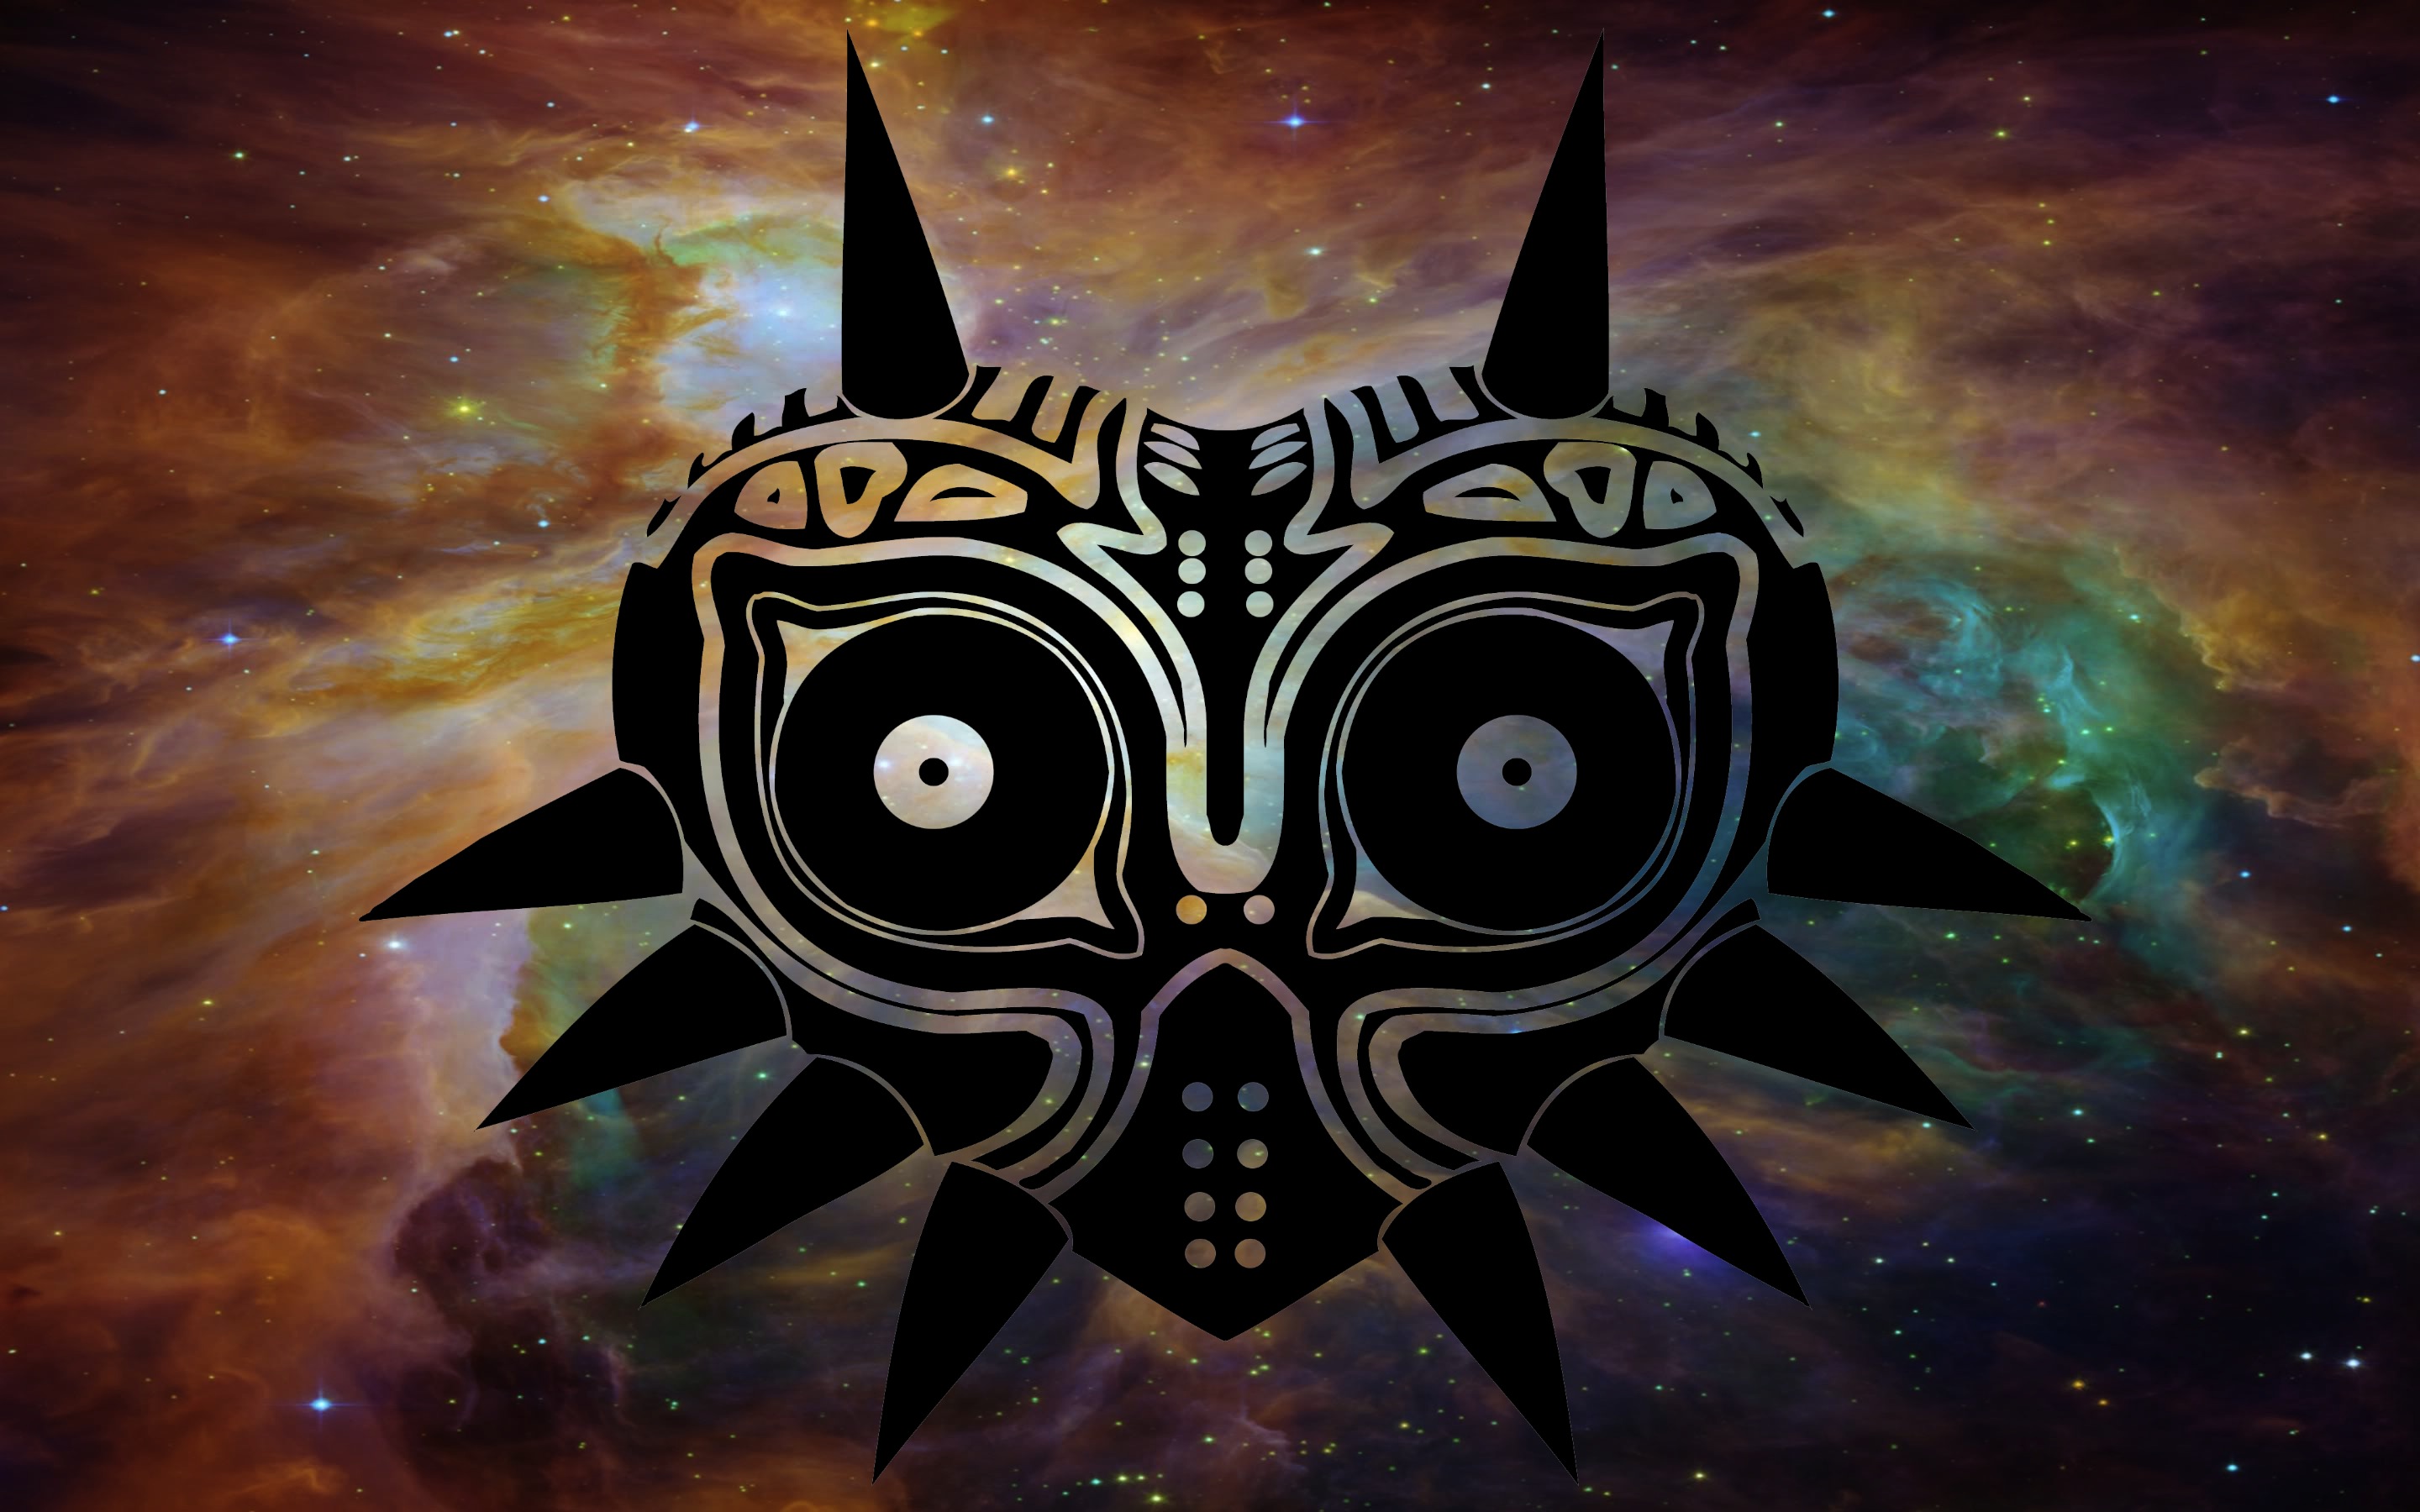 Here Is A Cool Majora S Mask Wallpaper I Made